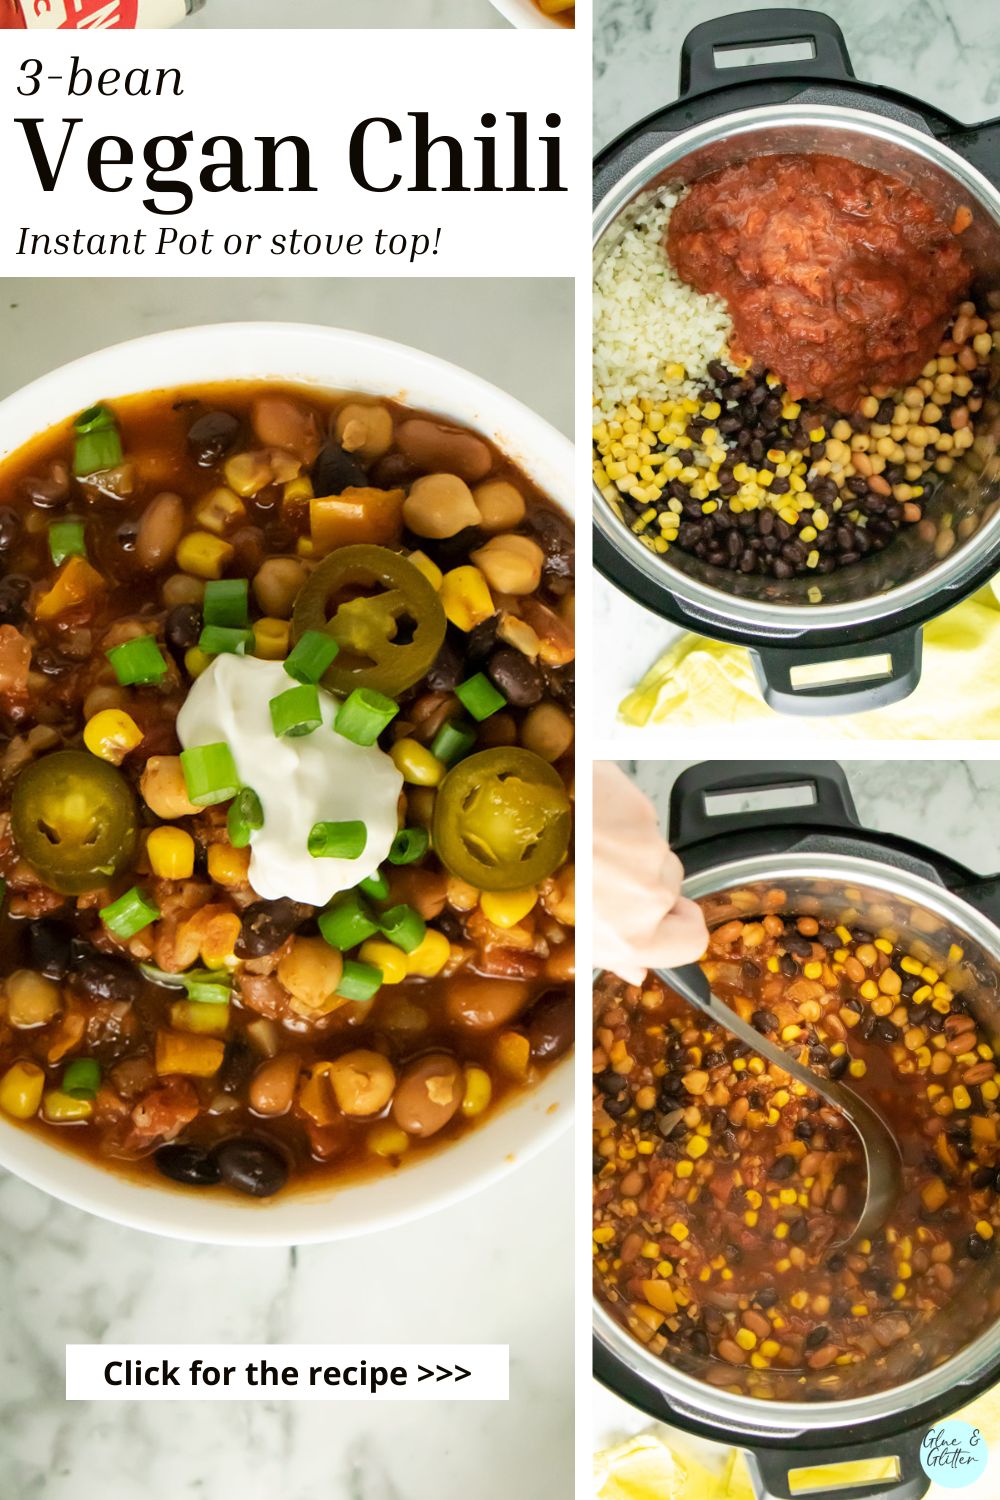 image collage showing the vegan bean chili in a bowl, the ingredients in the Instant Pot, and the cooked chili in the pot